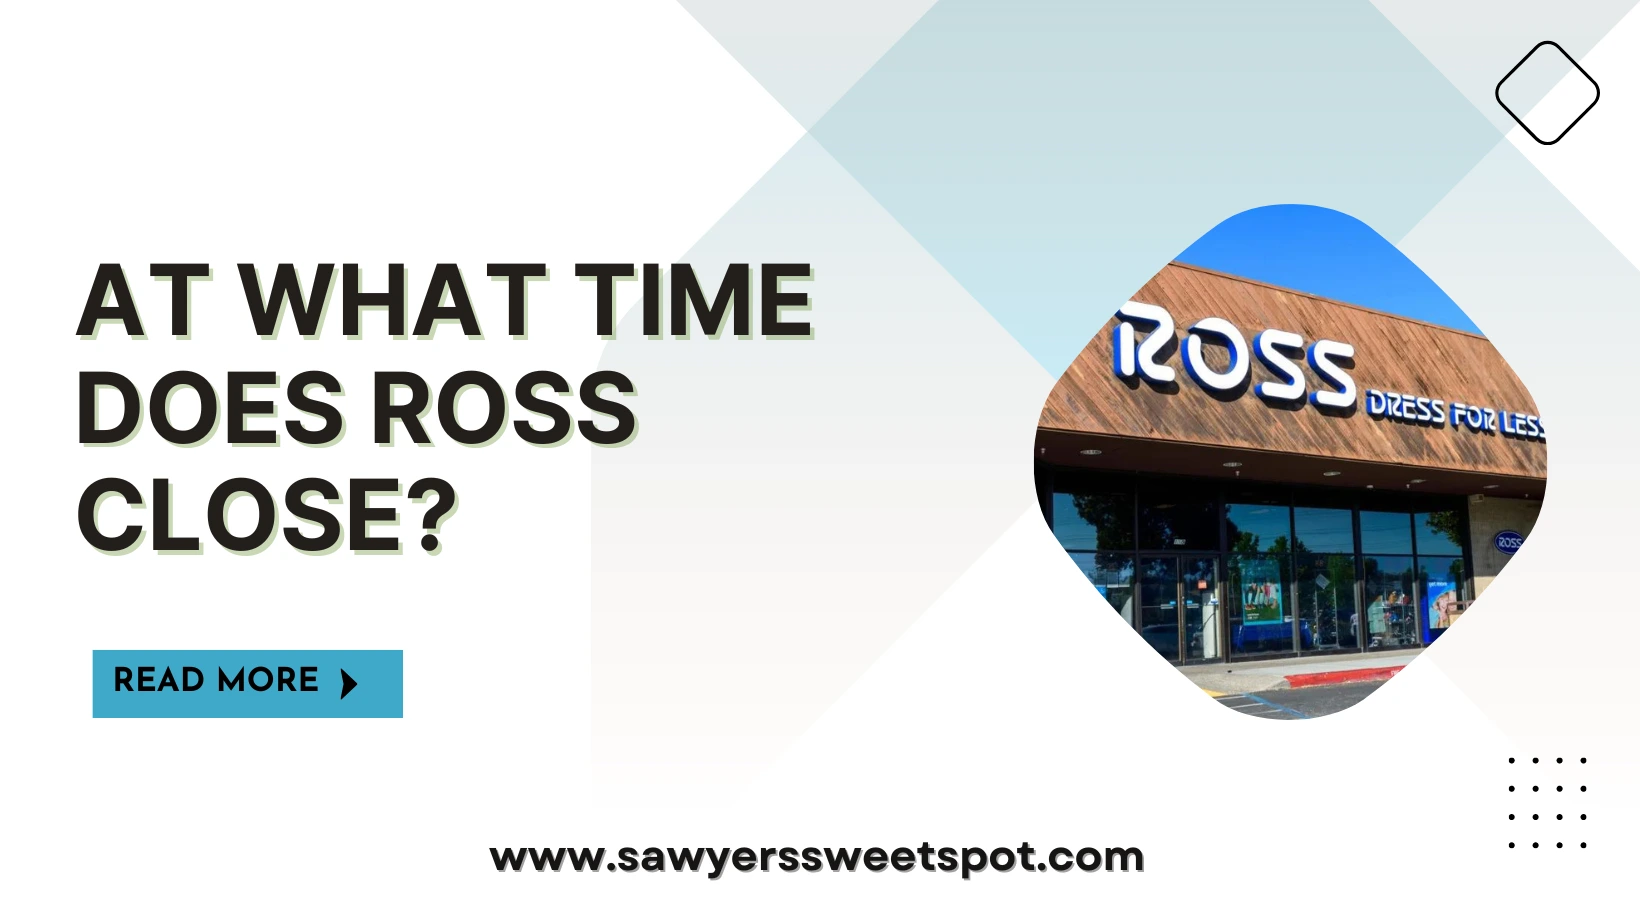 At What Time Does Ross Close?